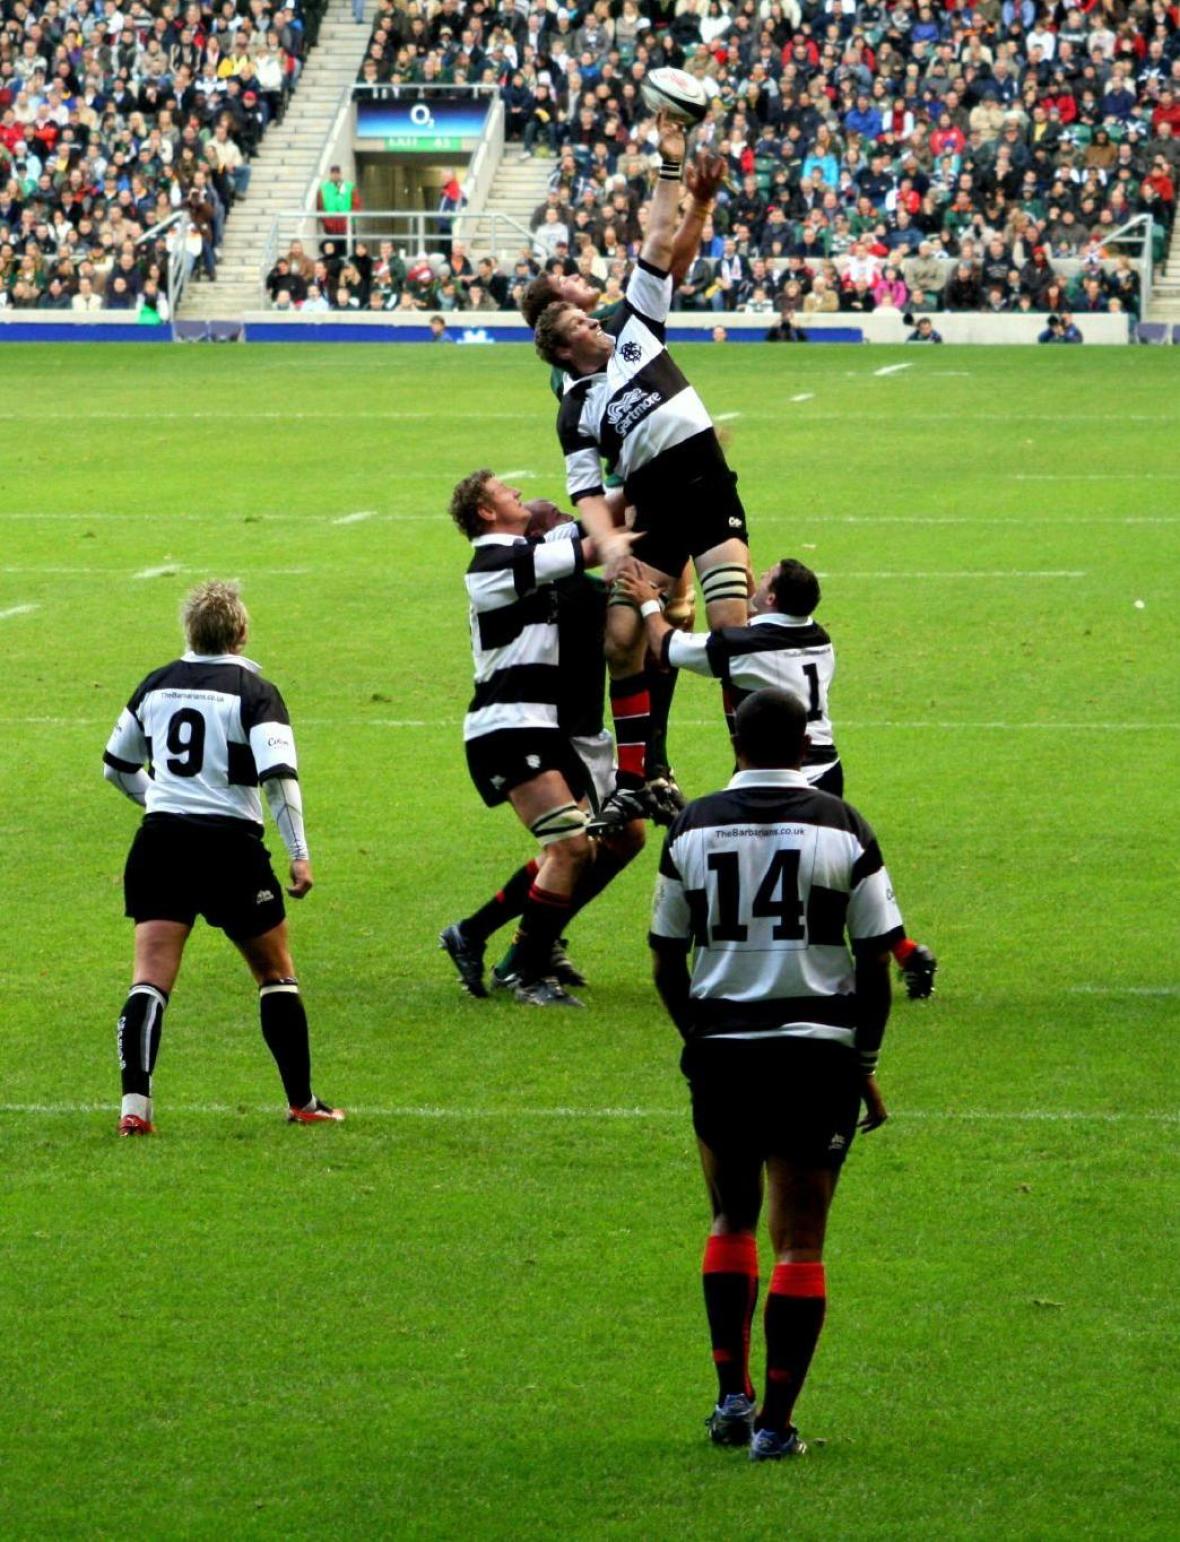 RUGBY: SO WHO ARE THE BARBARIANS?